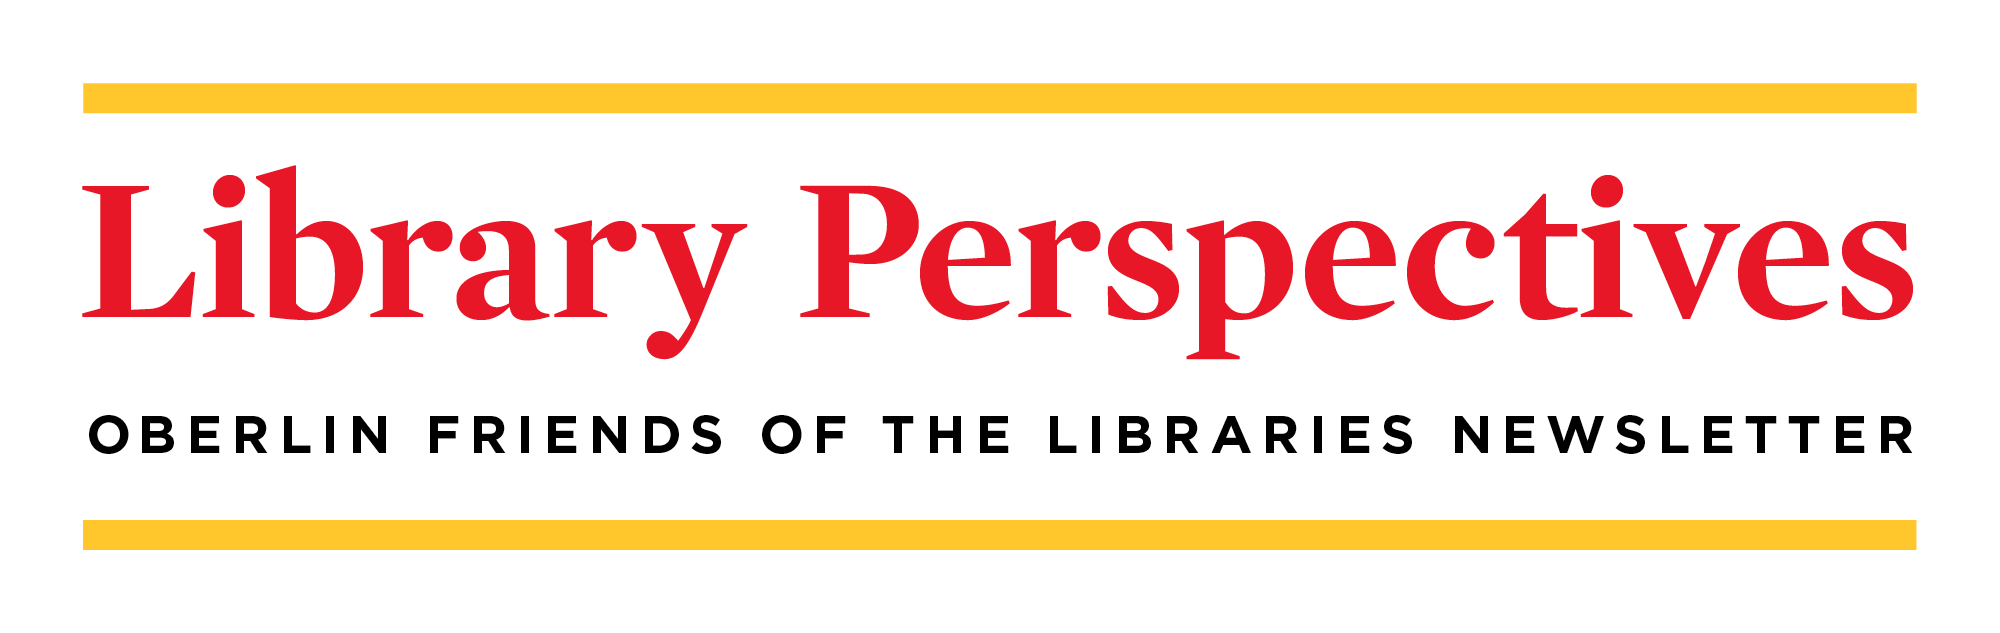 Library Perspectives Newsletter